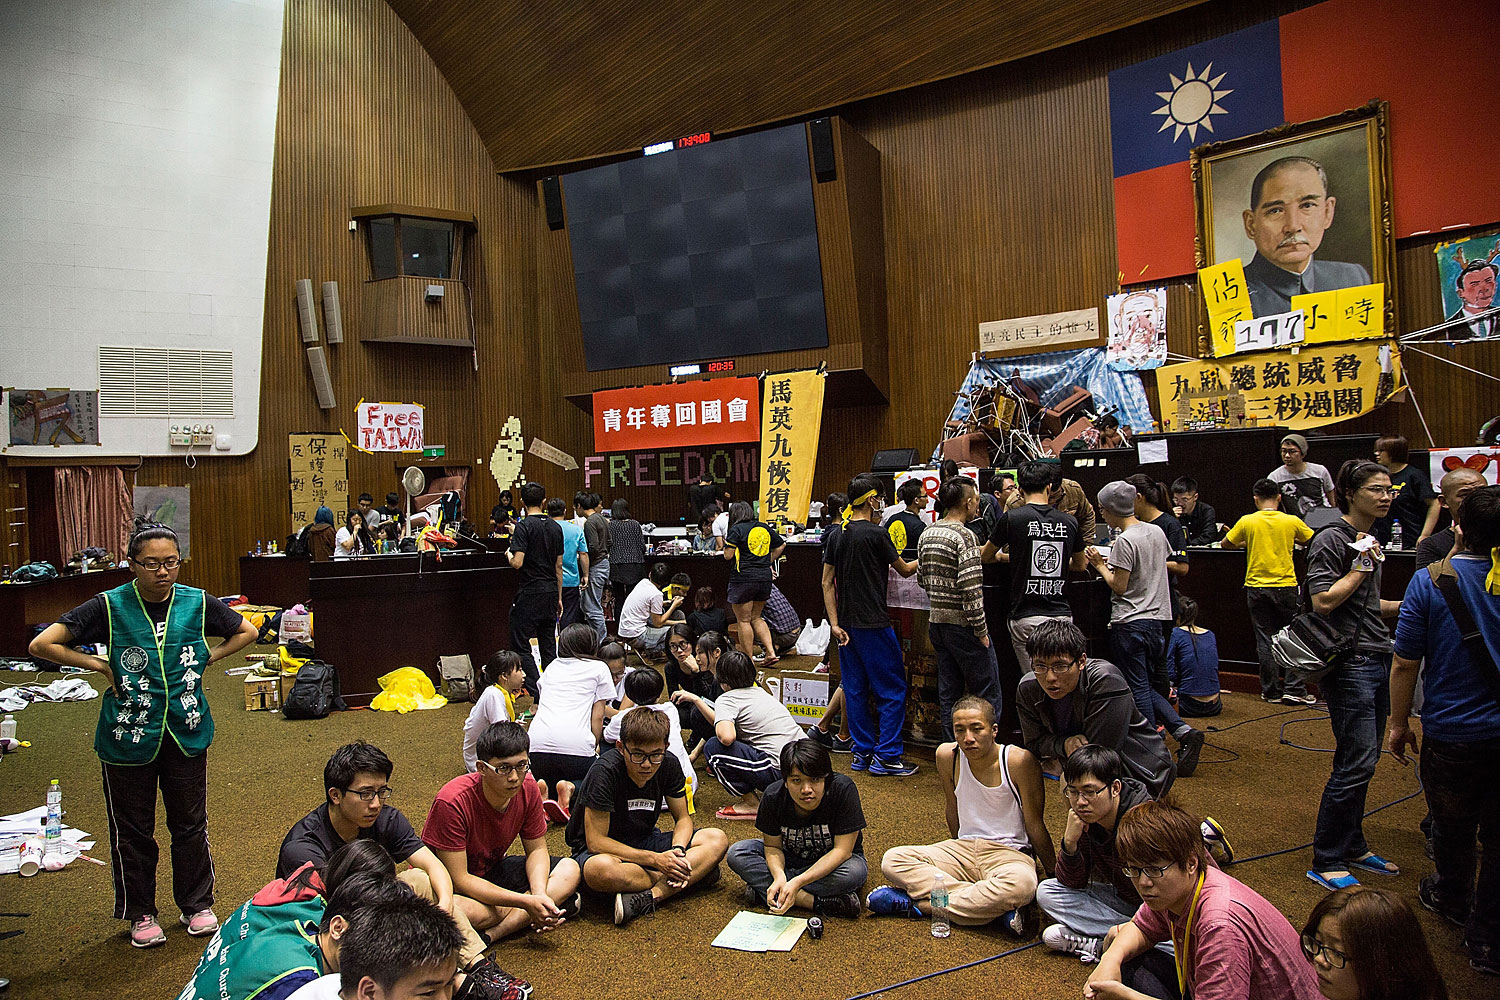 Student protesters occupy the legislature the day after the clash with riot police at the Executive Yuan on March 24, 2014 in Taipei, Taiwan.